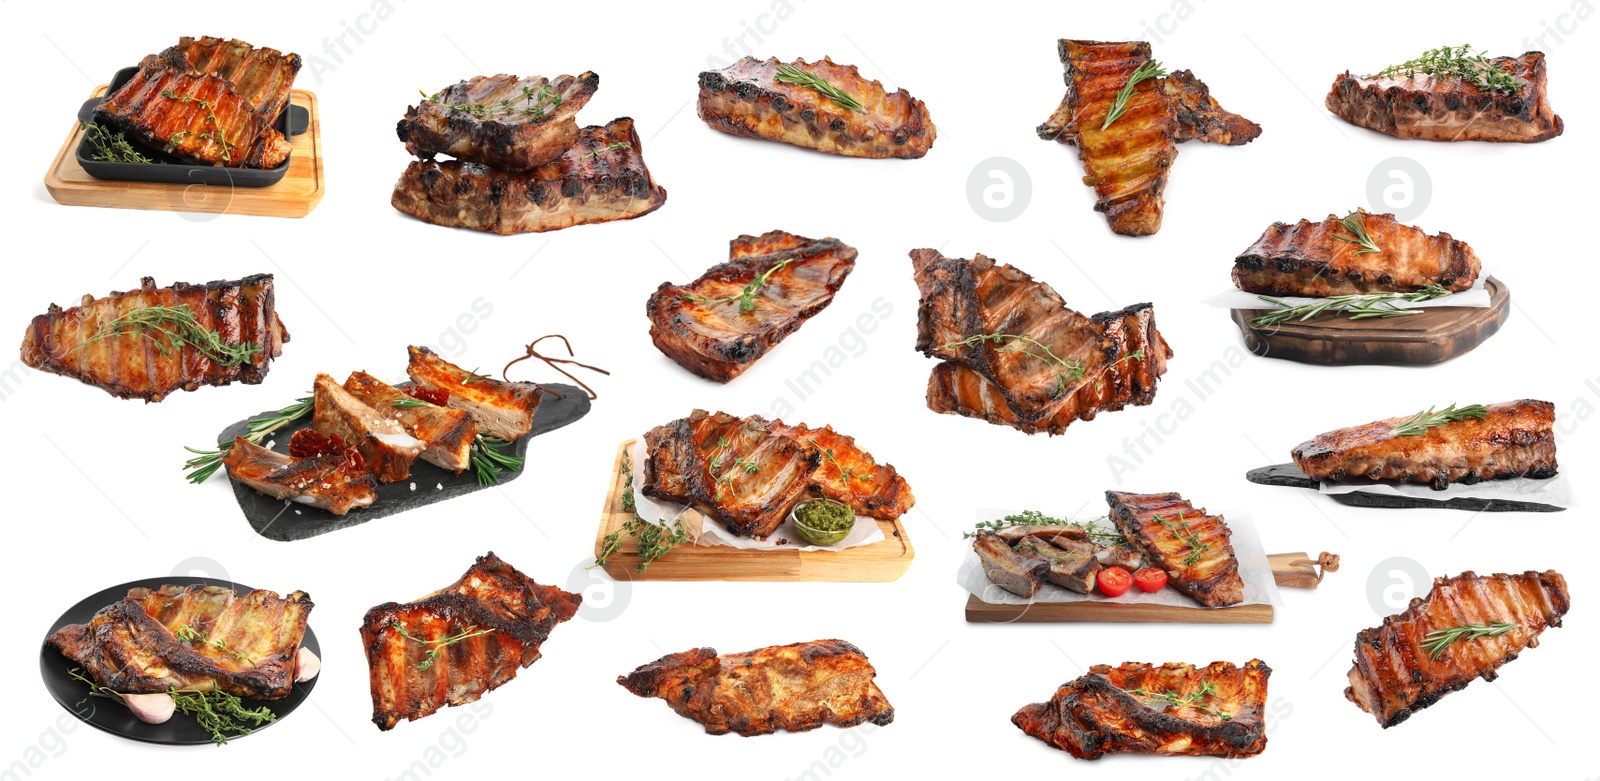 Image of Set of delicious roasted ribs on white background